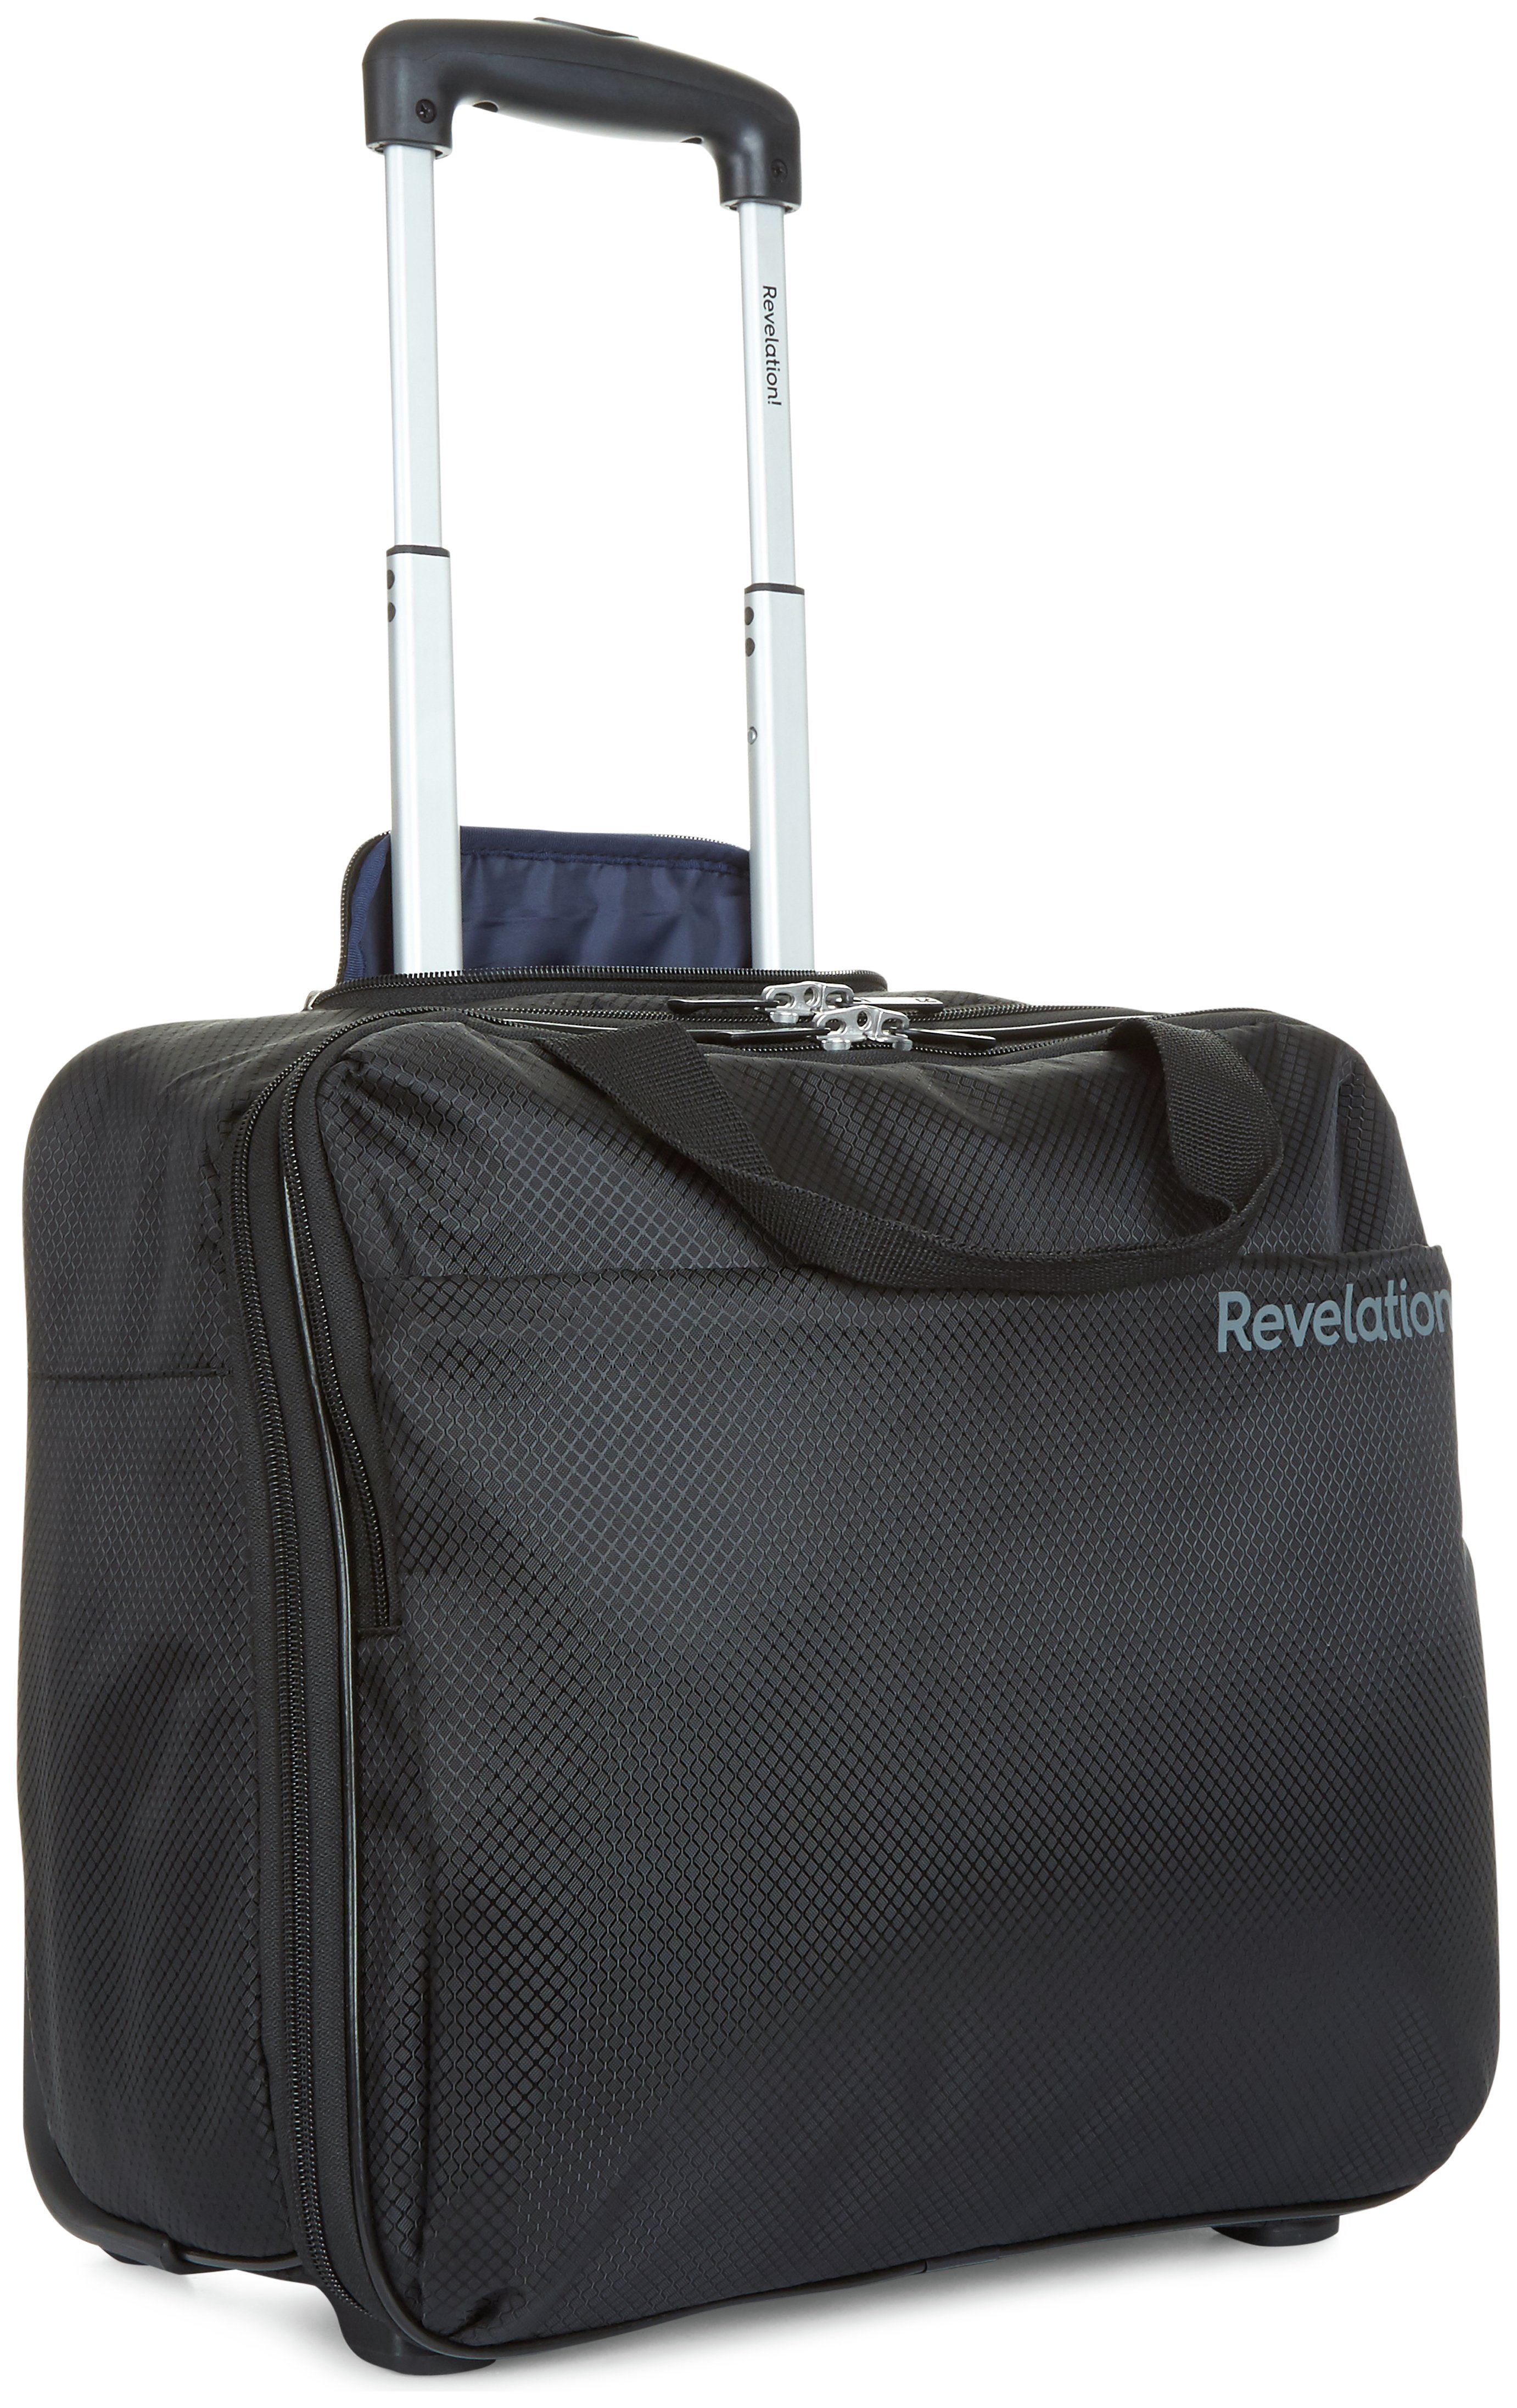 Revelation! Weightless Underseat Soft Cabin Suitcase review